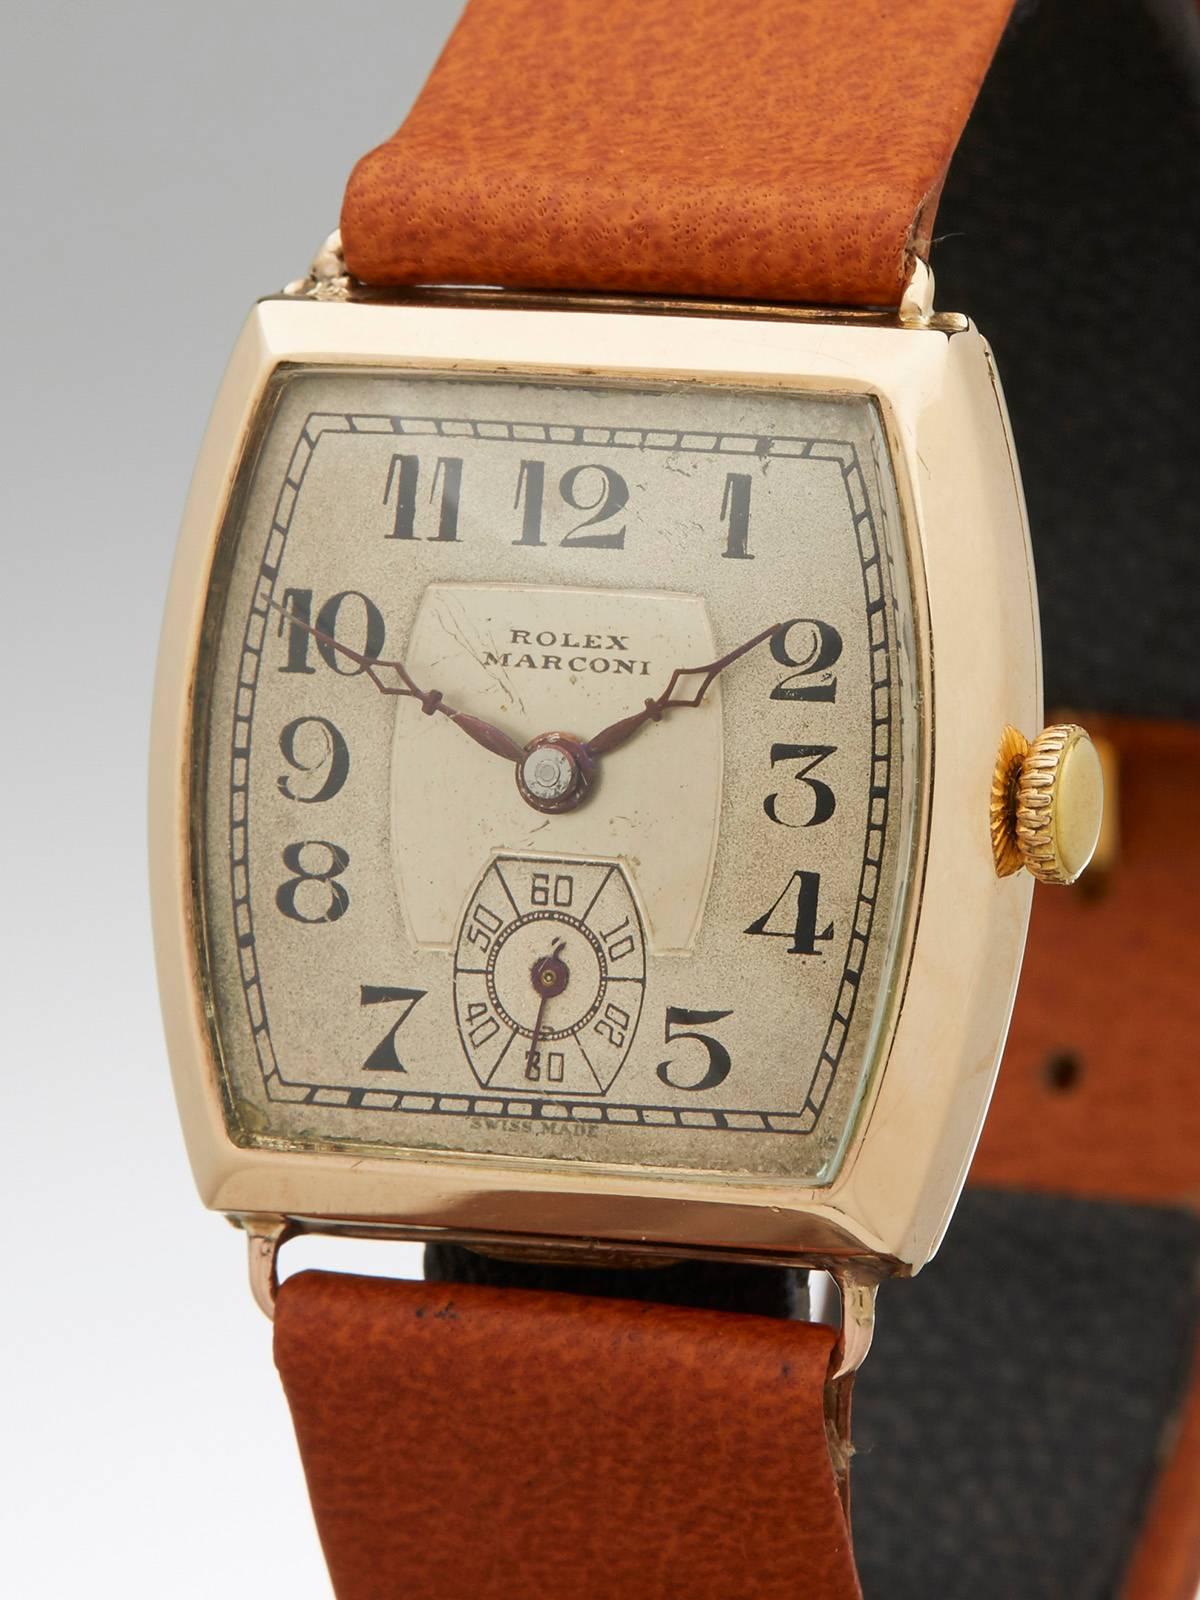 marconi special watch